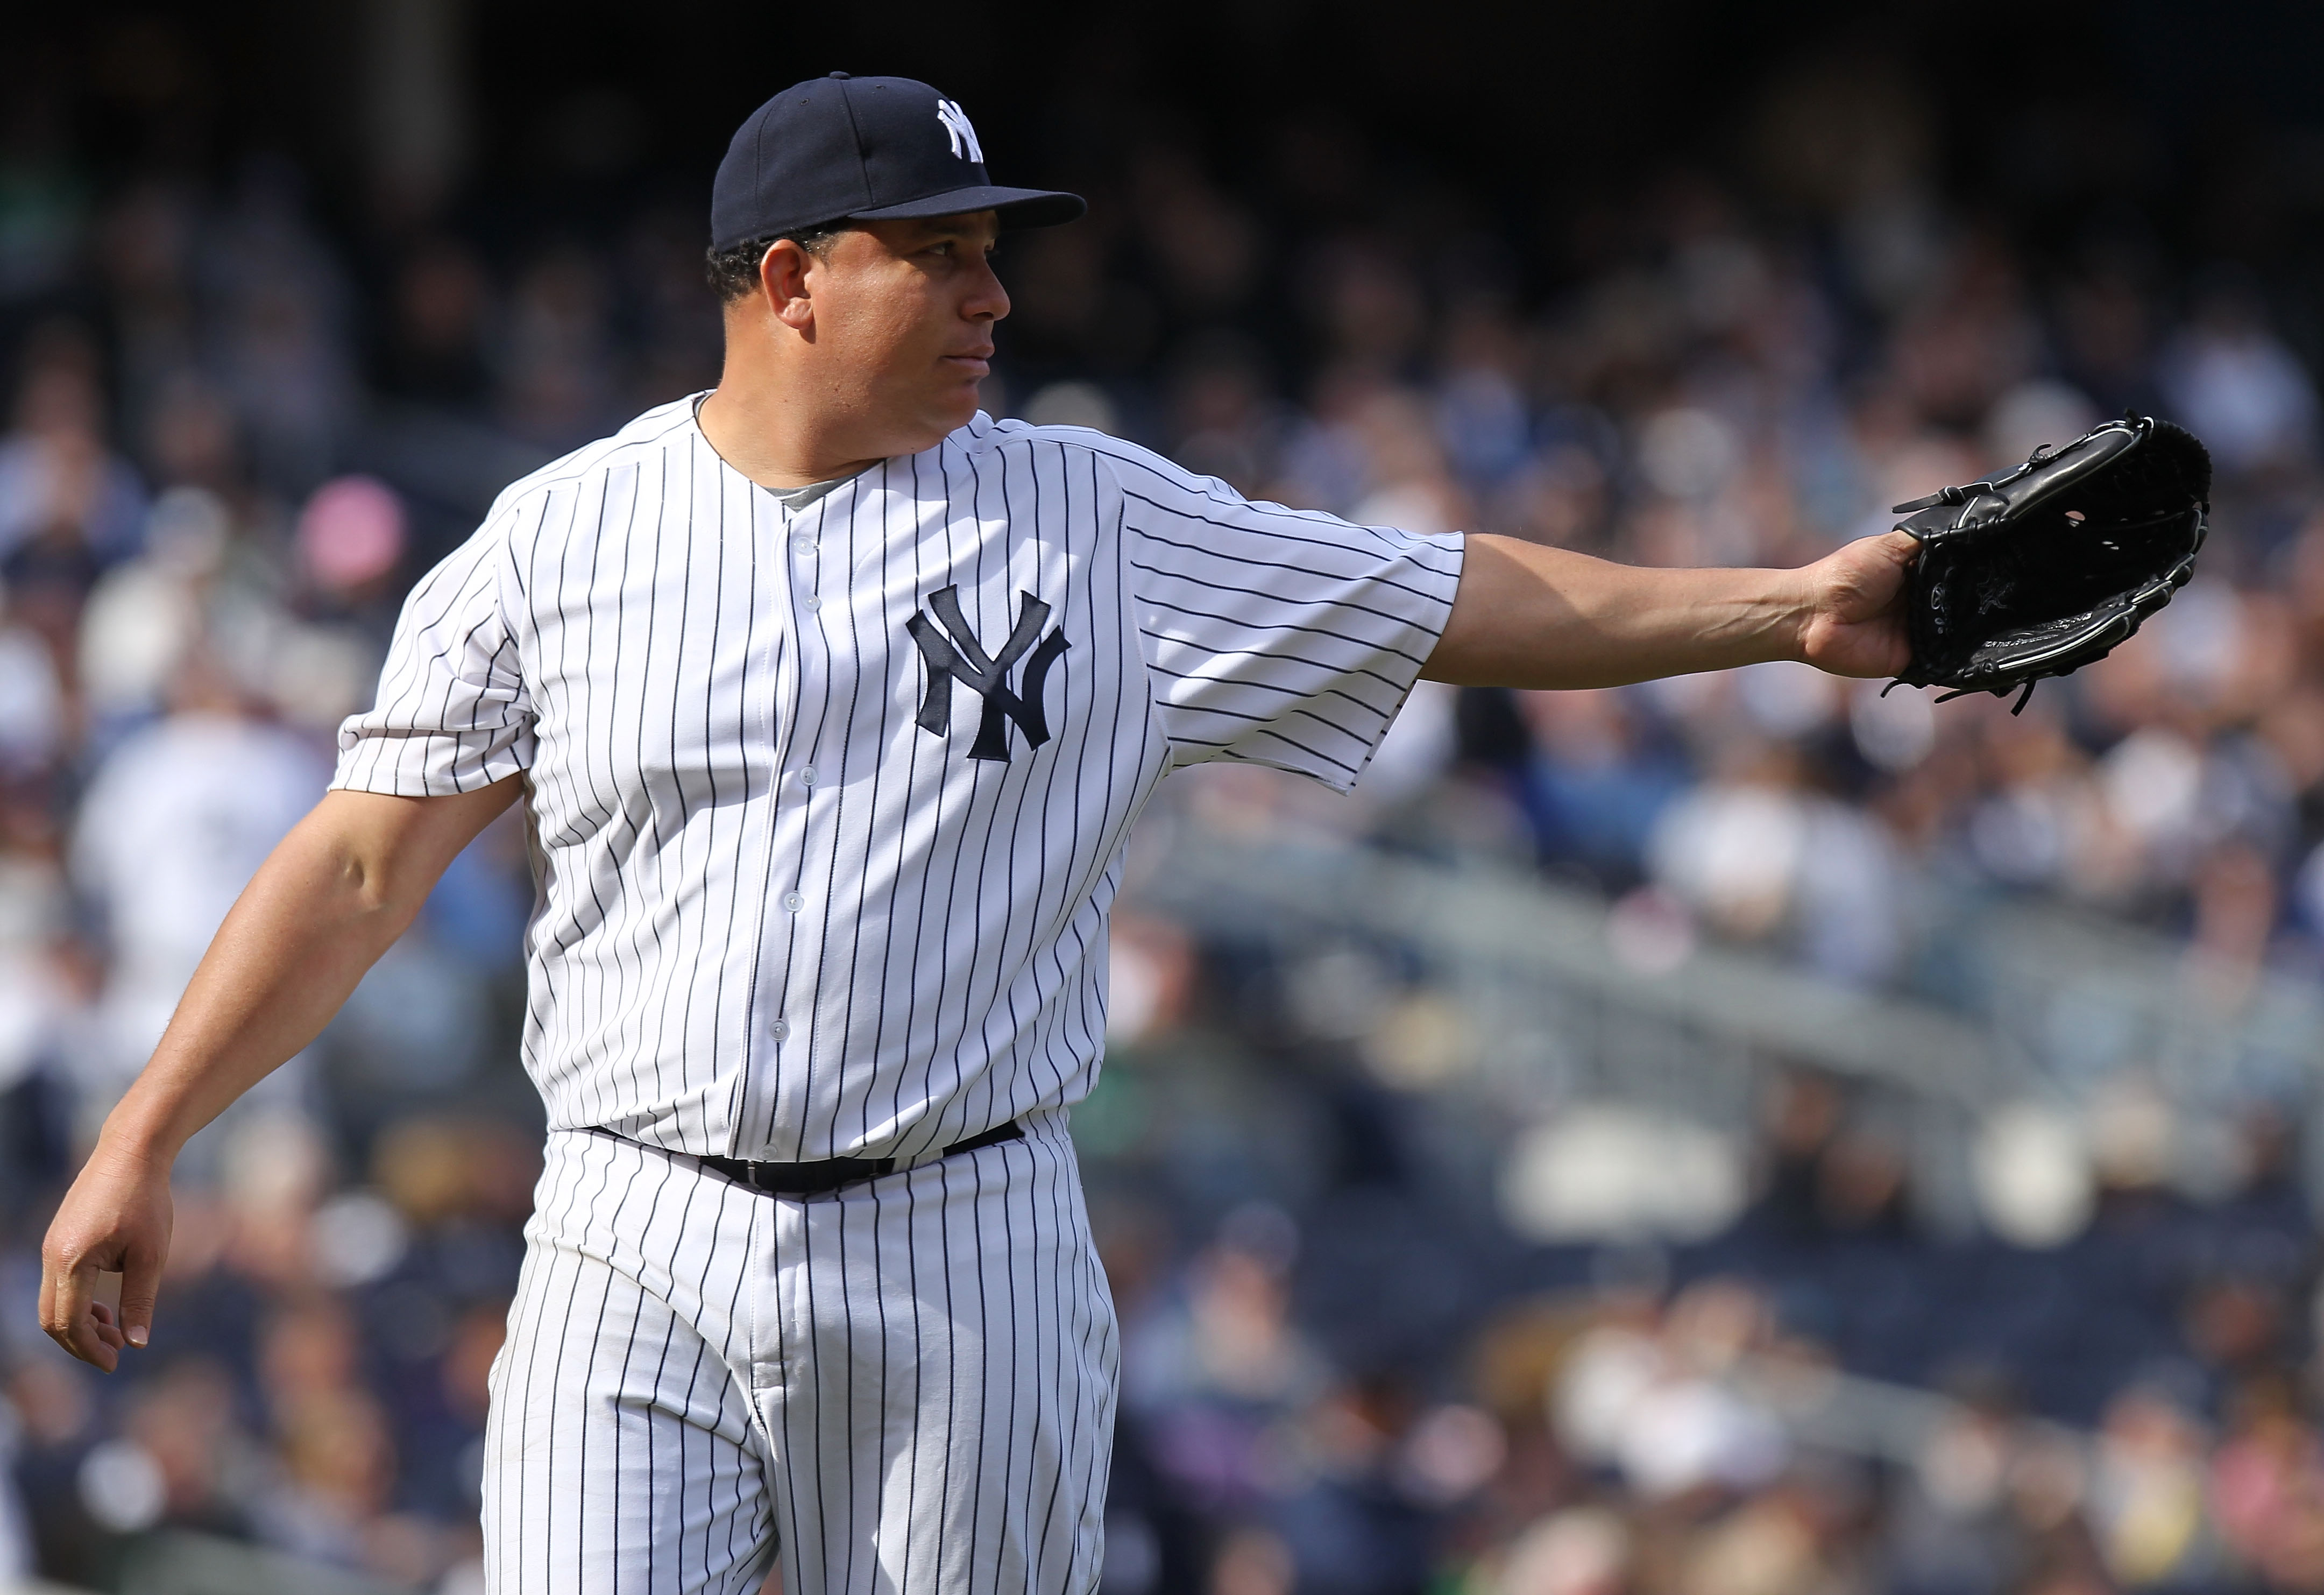 NEW YORK, NY - APRIL 03:  Bartolo Colon #40 of the New York Yankees against the Detroit Tigers at Yankee Stadium on April 3, 2011 in the Bronx borough of New York City.  (Photo by Nick Laham/Getty Images)